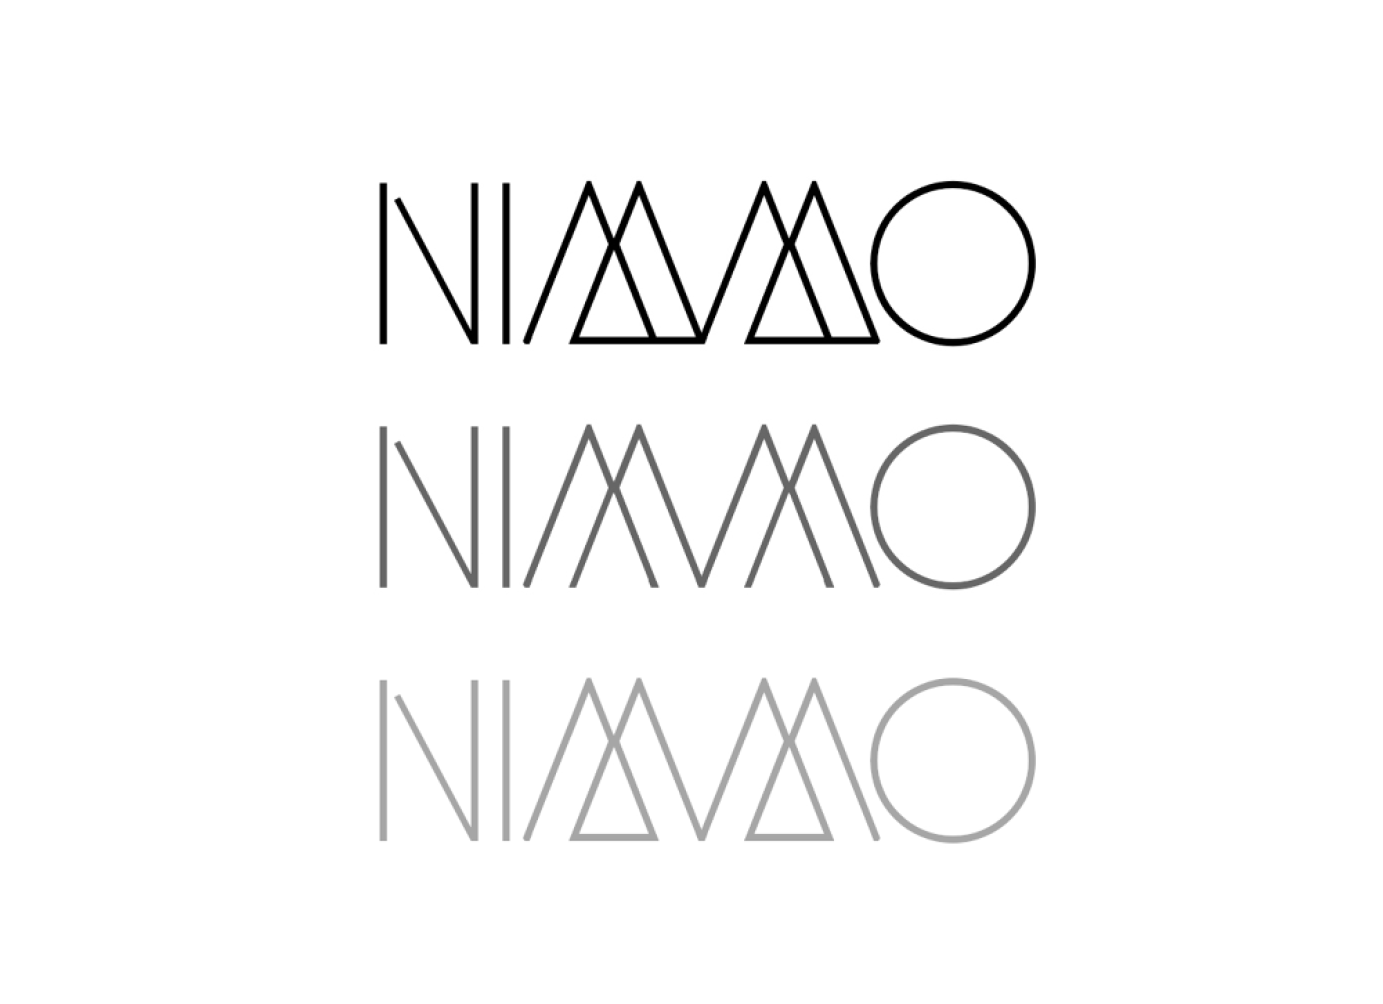 Graphic design for Nimmo by humankind